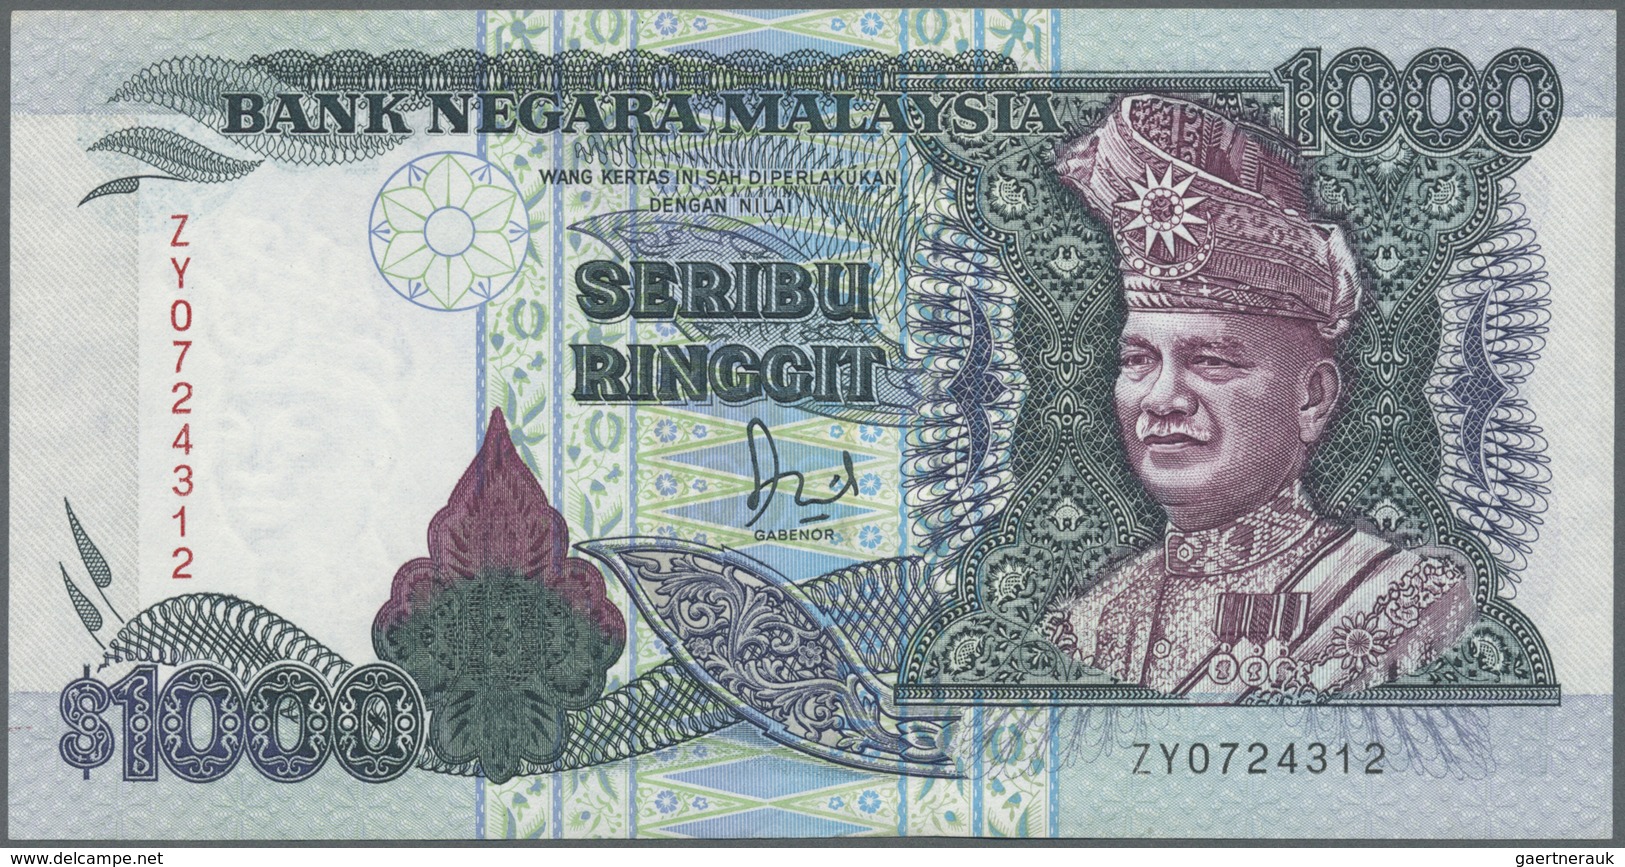 Malaysia: 1000 Ringgit ND P. 34, In Condition: AUNC. - Malaysia